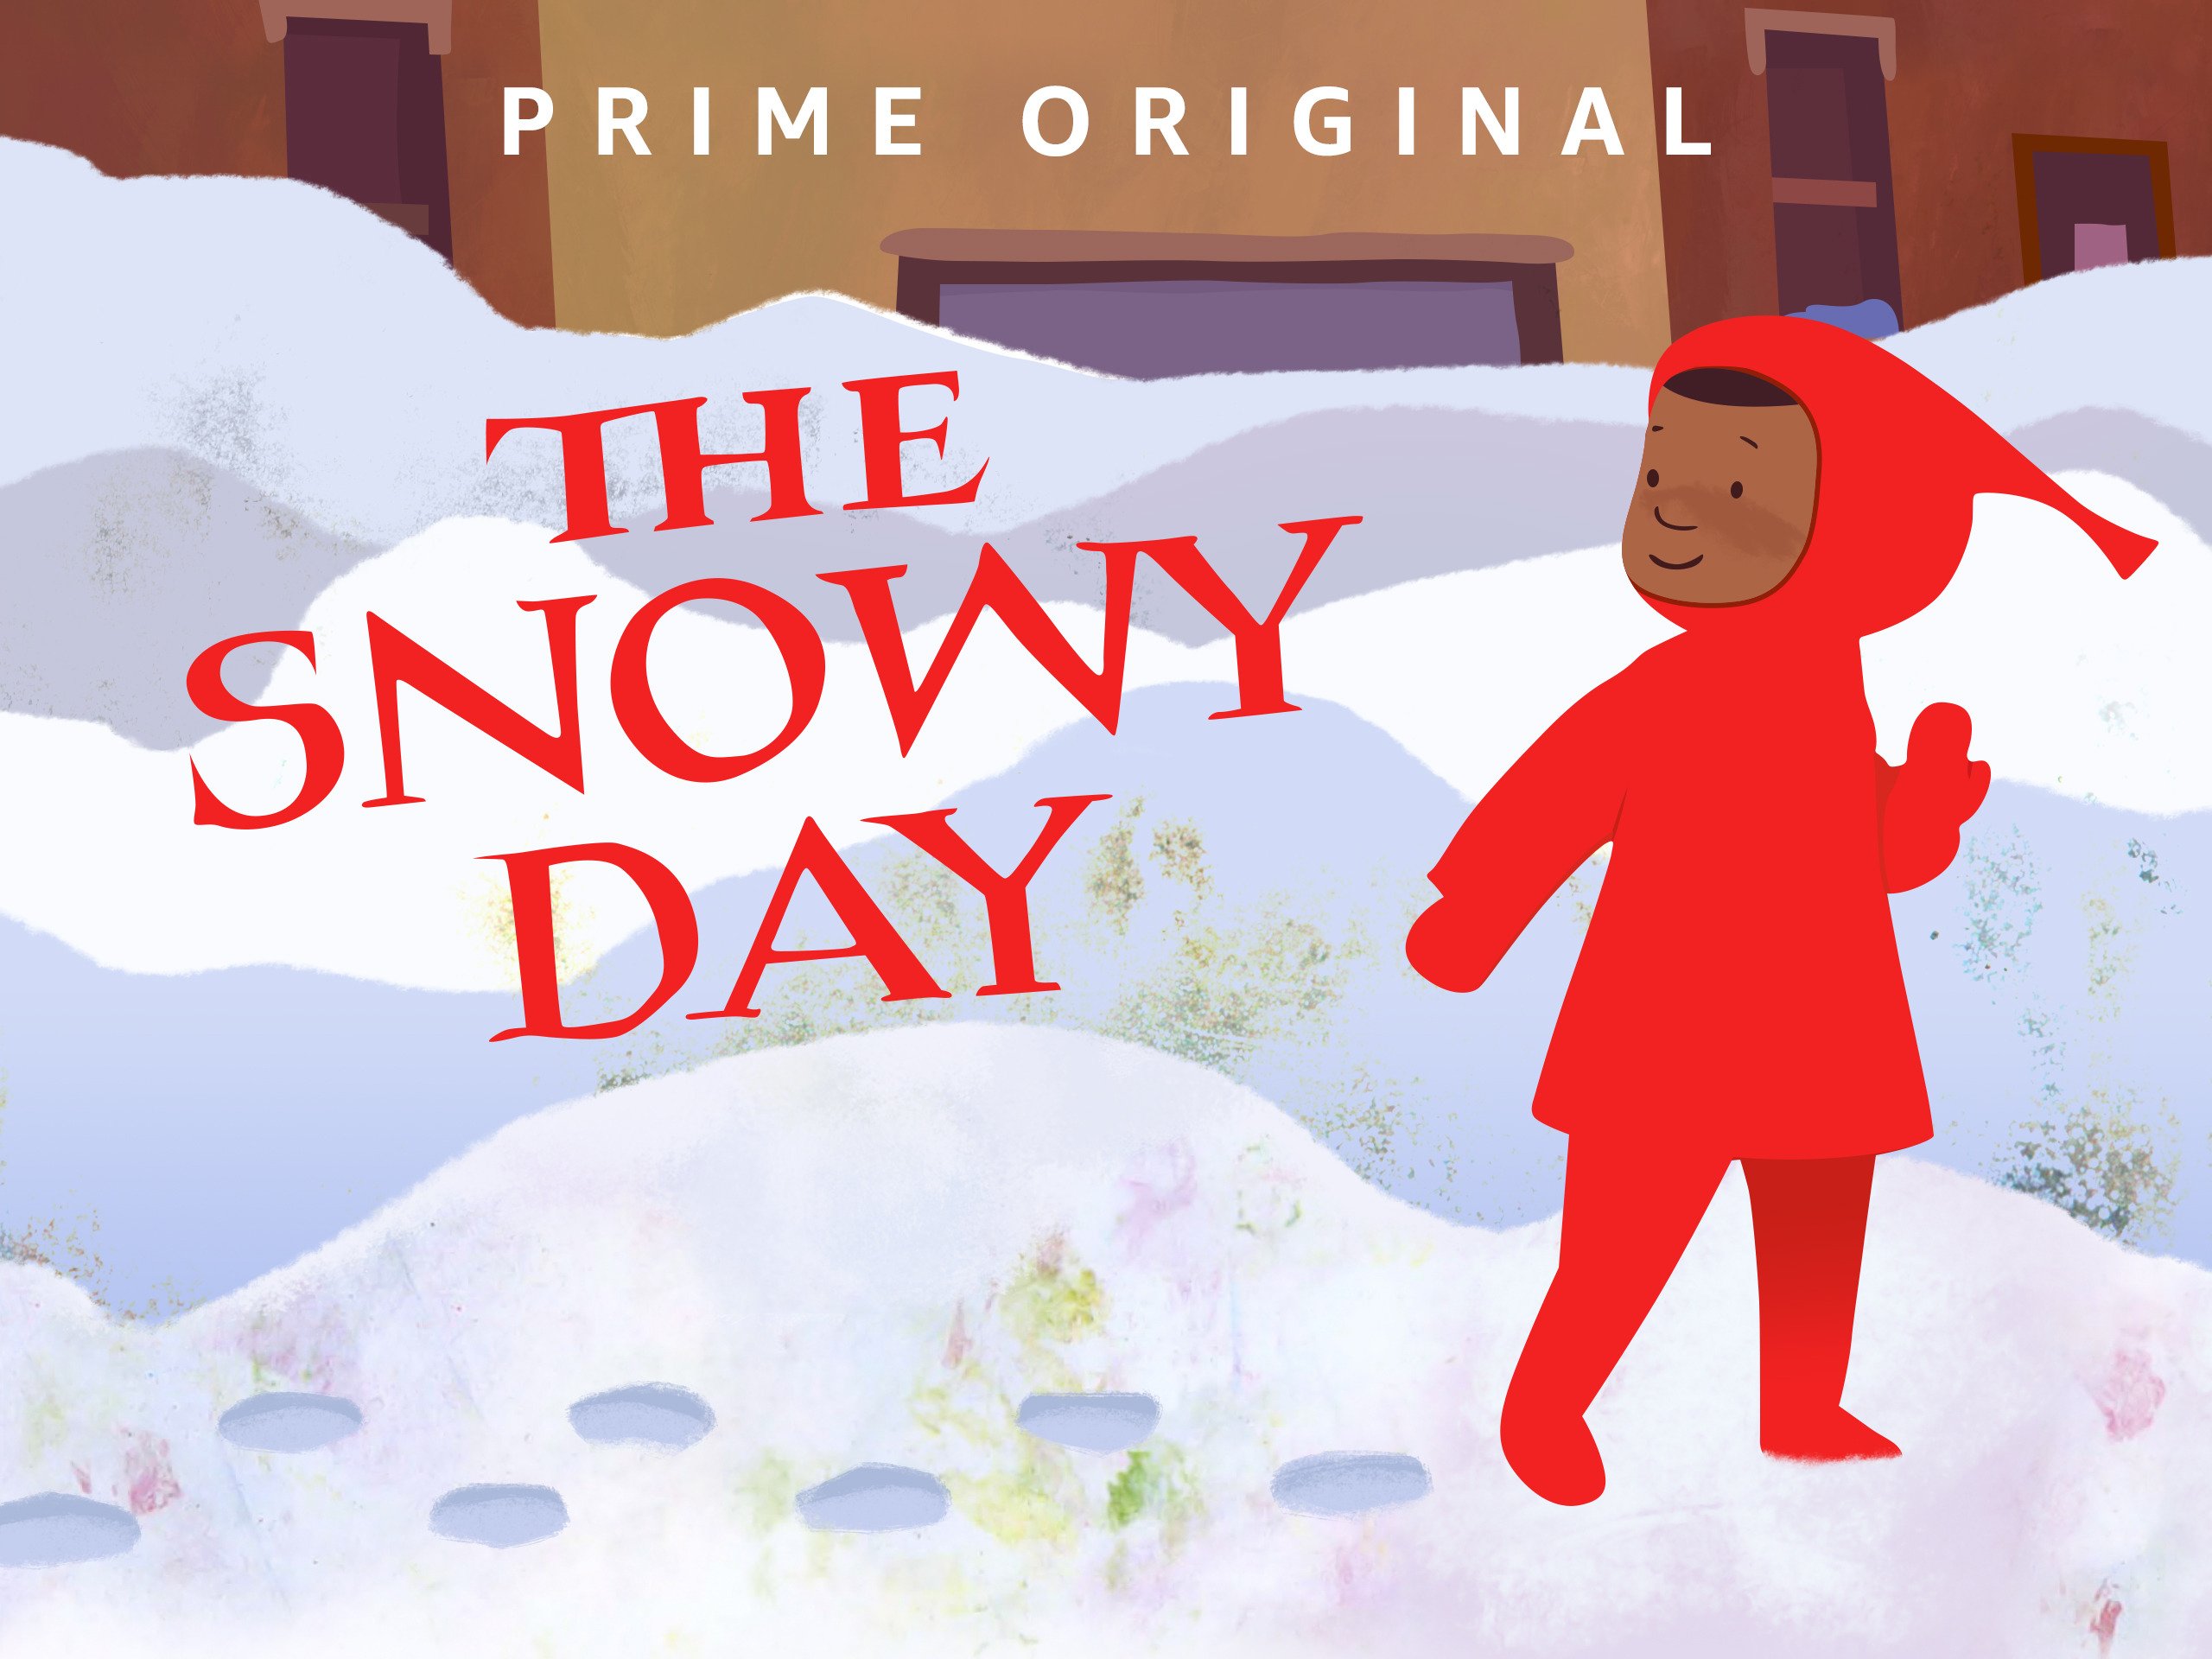 Amazon.com: The Snowy Day: Donielle Hansley, Laurence Fishburne ...